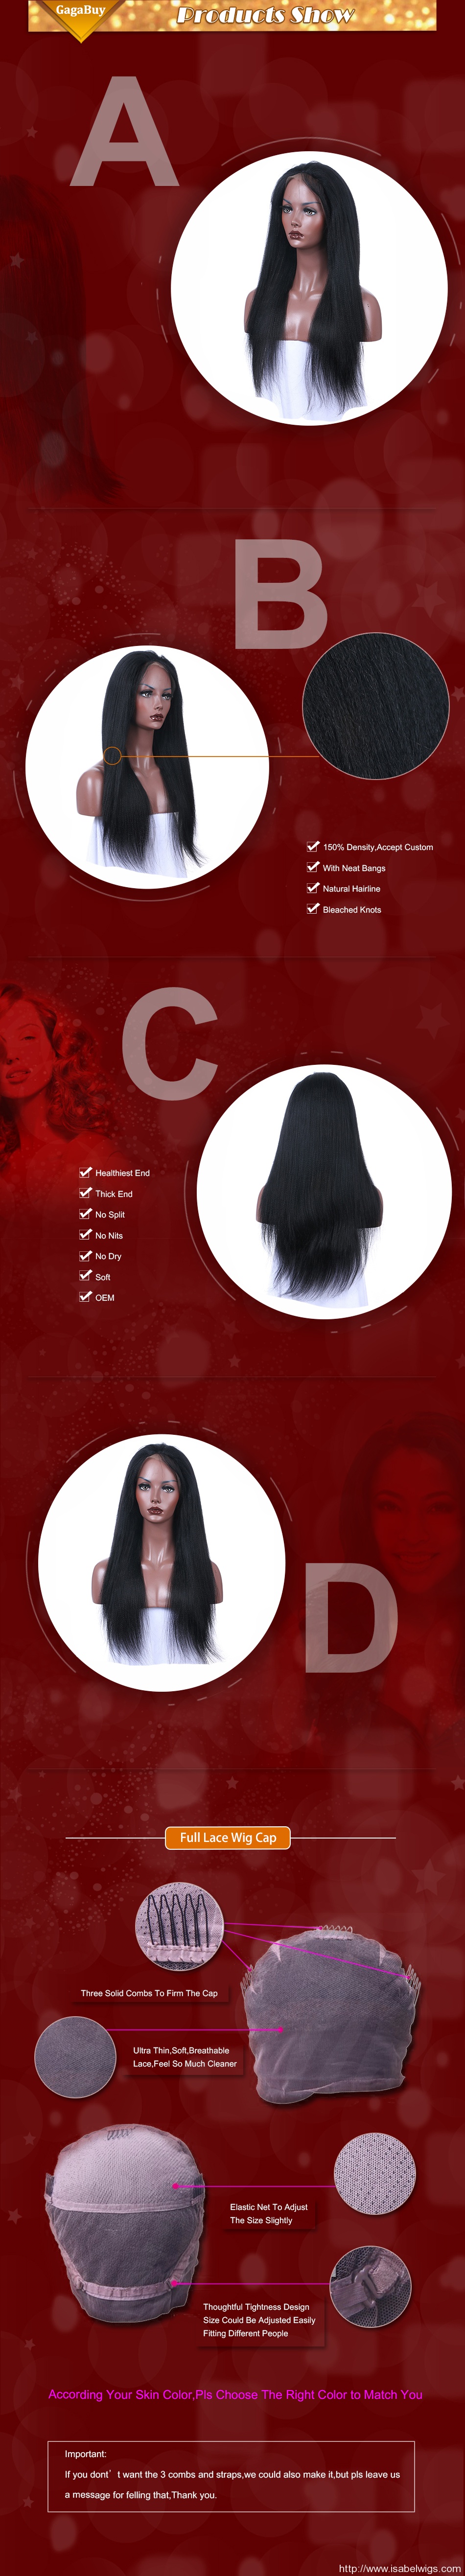 Full-Lace-Wig